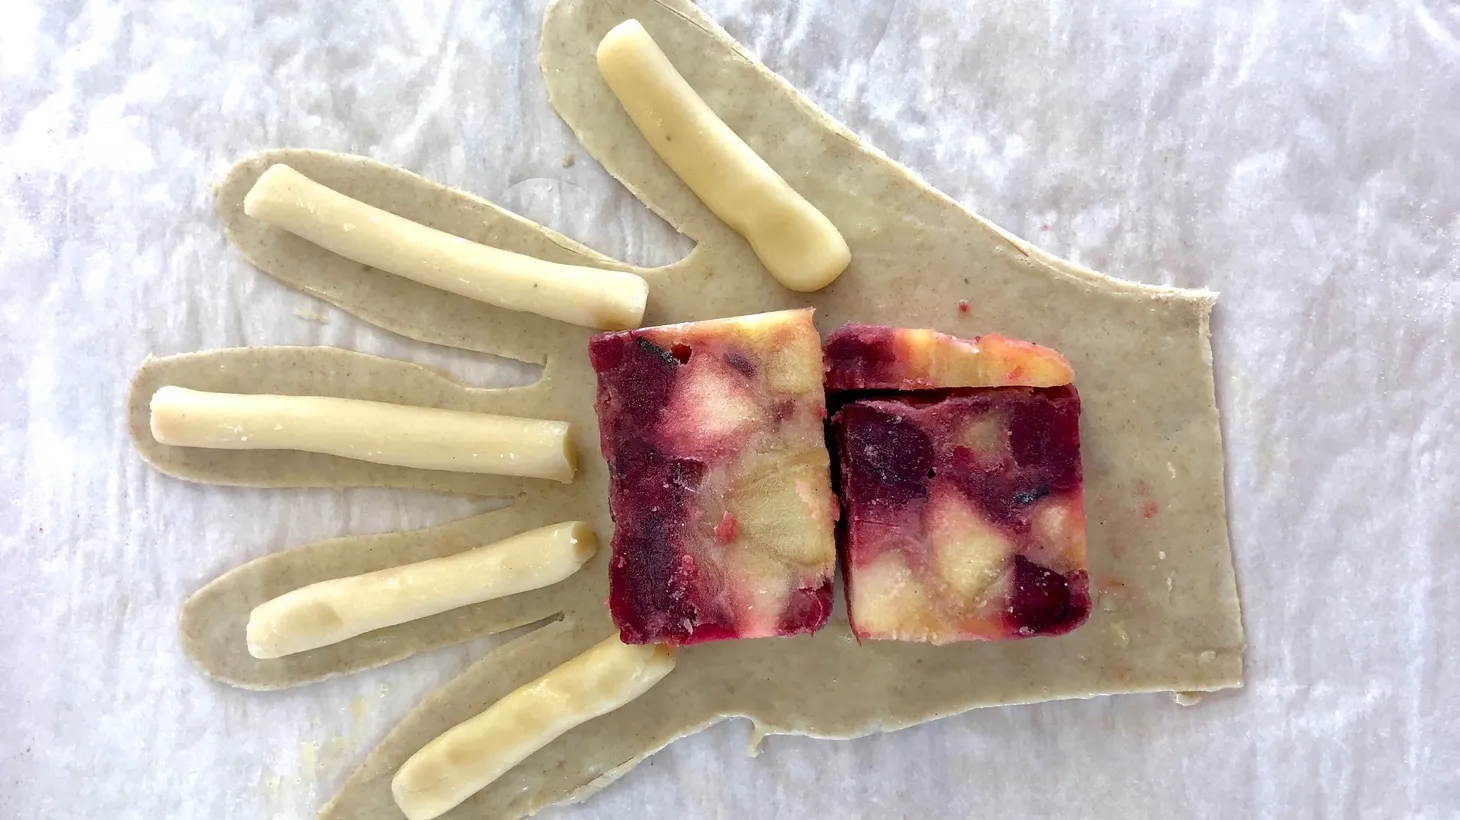 Pastry chef Sherry Yard takes hand pies literally with this blackberry, apple, and almond cream number.